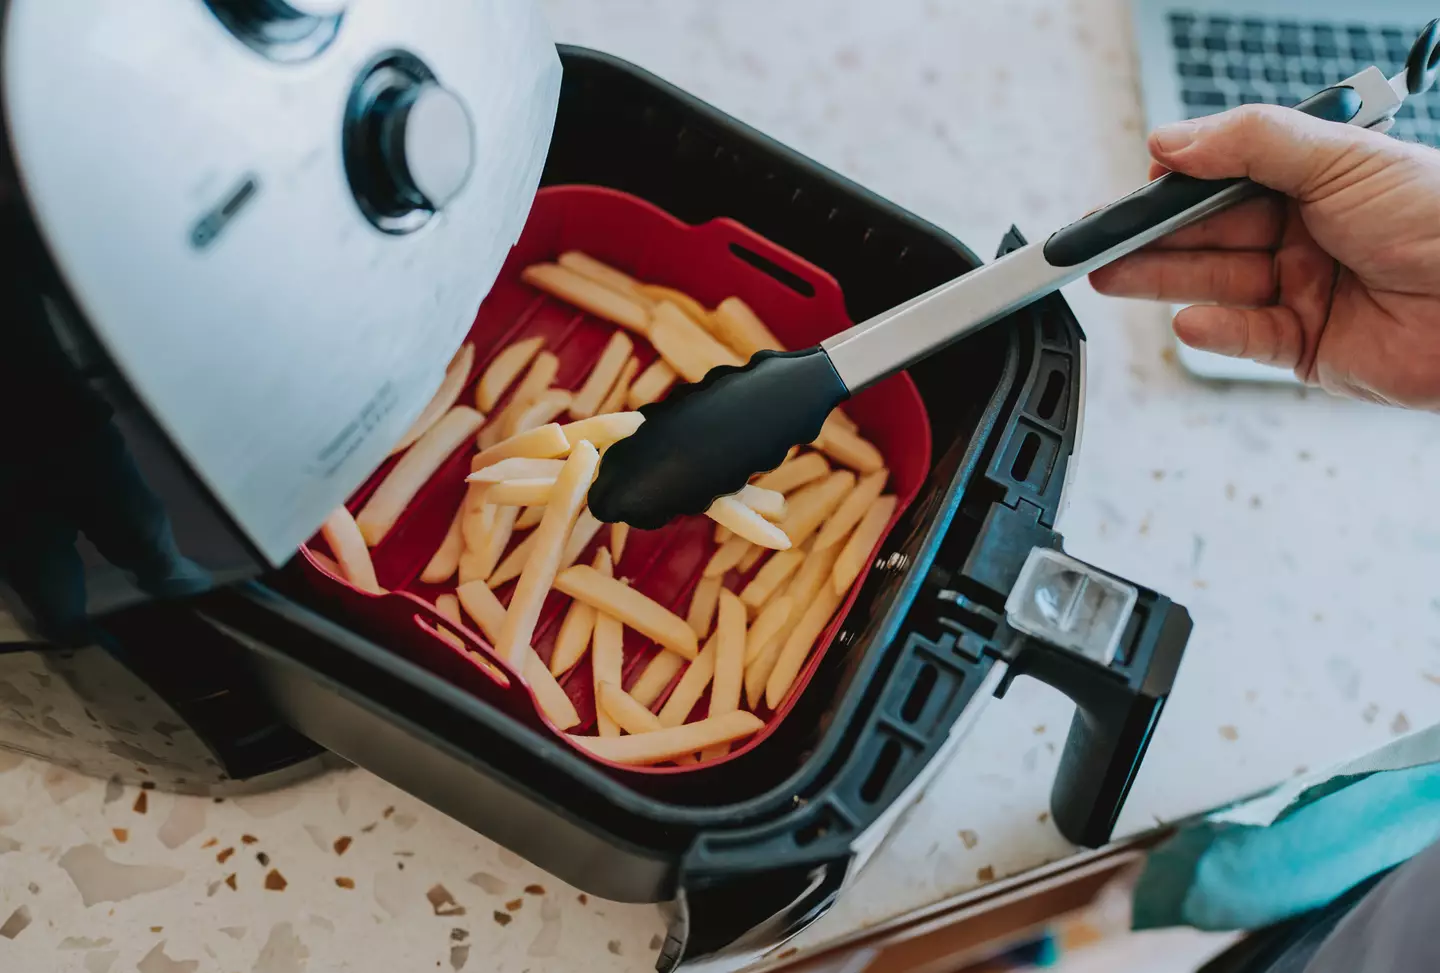 Your air fryer could be a hazard in your home, depending on where in your kitchen it is. (Getty Stock)